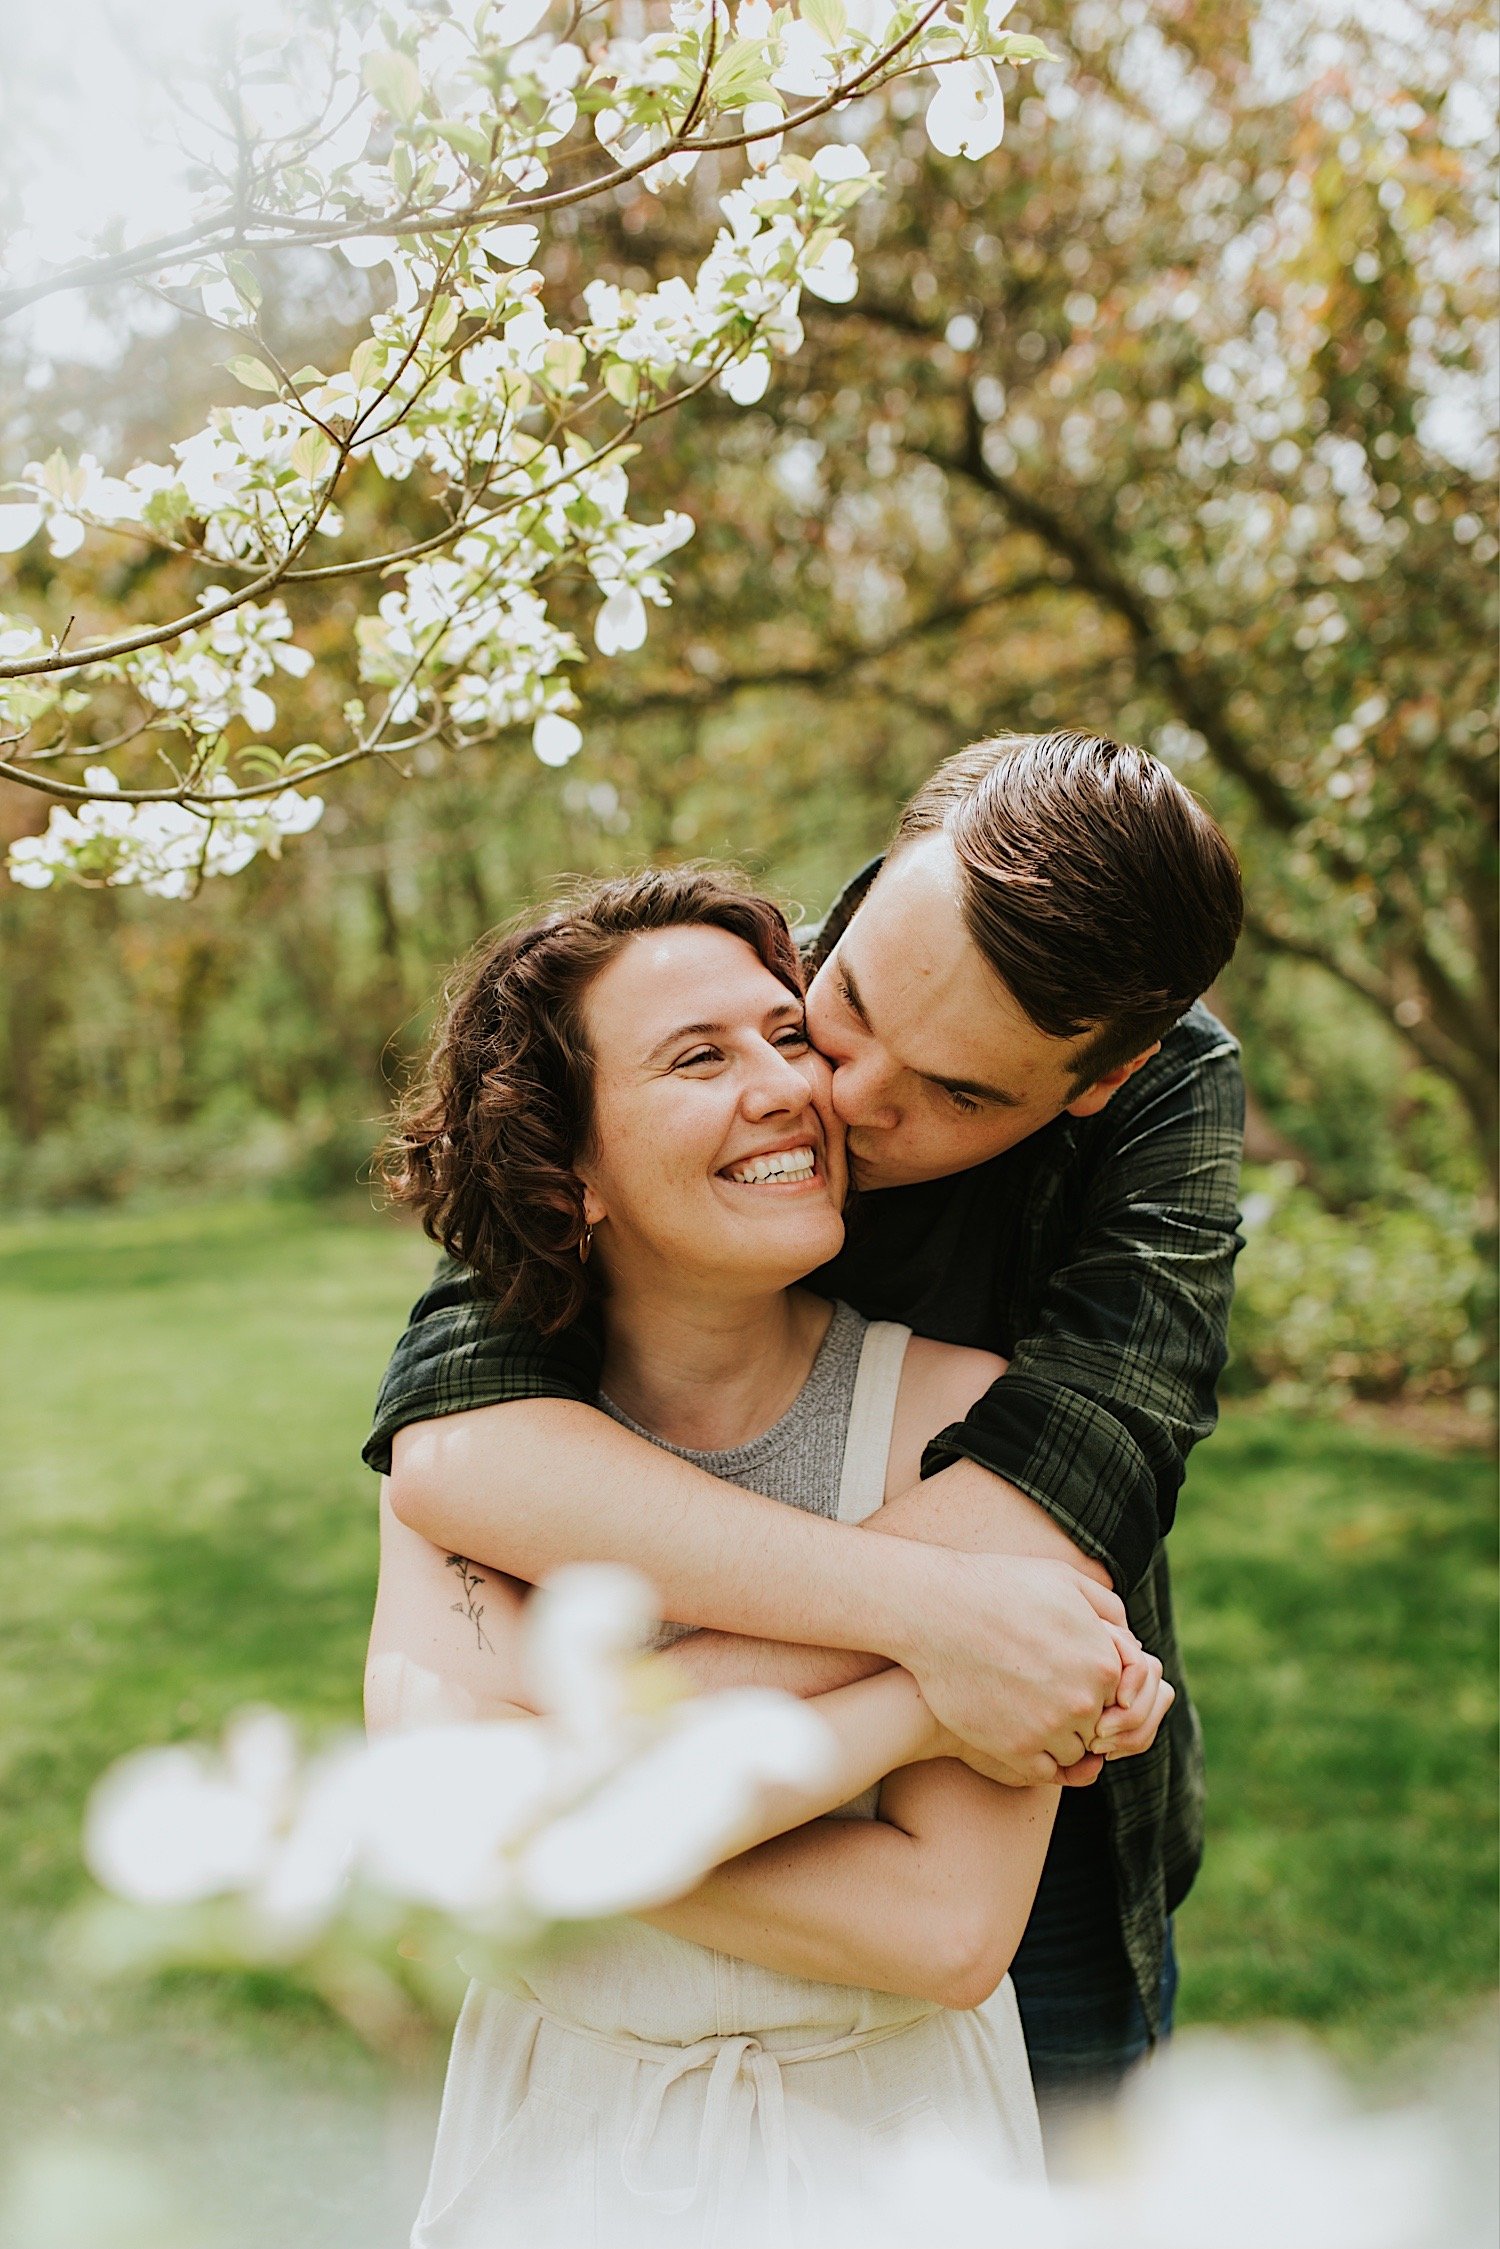 future groom holds his future bride under a tree with white flowers in a park in Normal Illinois as he kisses her cheek